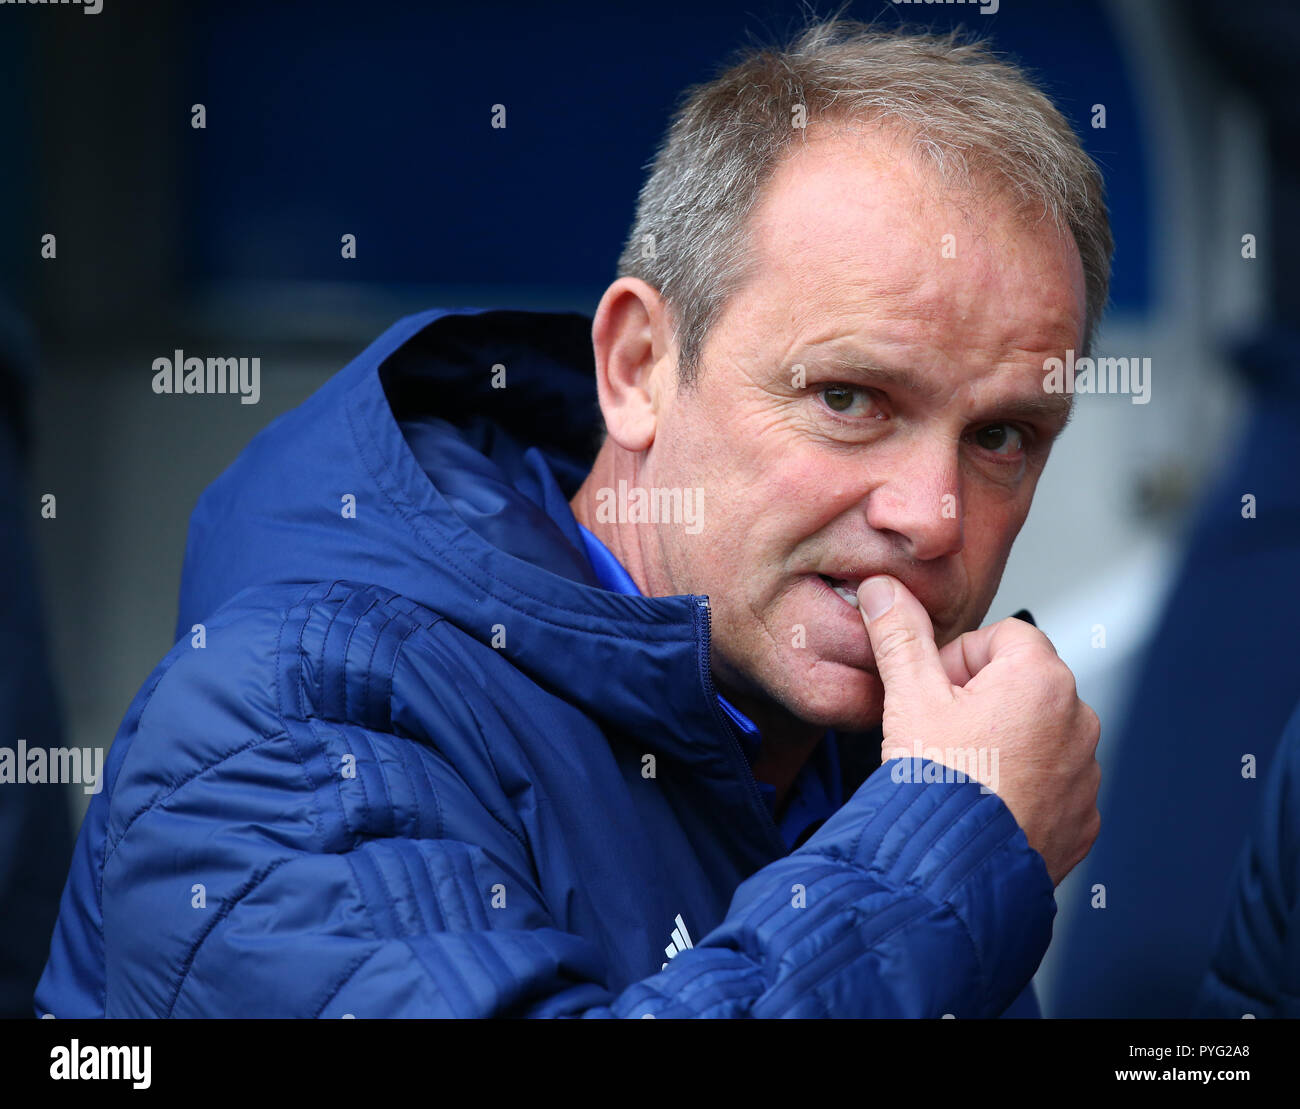 London, UK. 27 October, 2018 Ipswich Town manager Bryan Klug (caretaker) during Sky Bet Championship match between Millwall and Ipswich Town at The Den Ground, London. Credit Action Foto Sport   FA Premier League and Football League images are subject to DataCo Licence EDITORIAL USE ONLY No use with unauthorised audio, video, data, fixture lists (outside the EU), club/league logos or 'live' services. Online in-match use limited to 45 images (+15 in extra time). No use to emulate moving images. Credit: Action Foto Sport/Alamy Live News Stock Photo